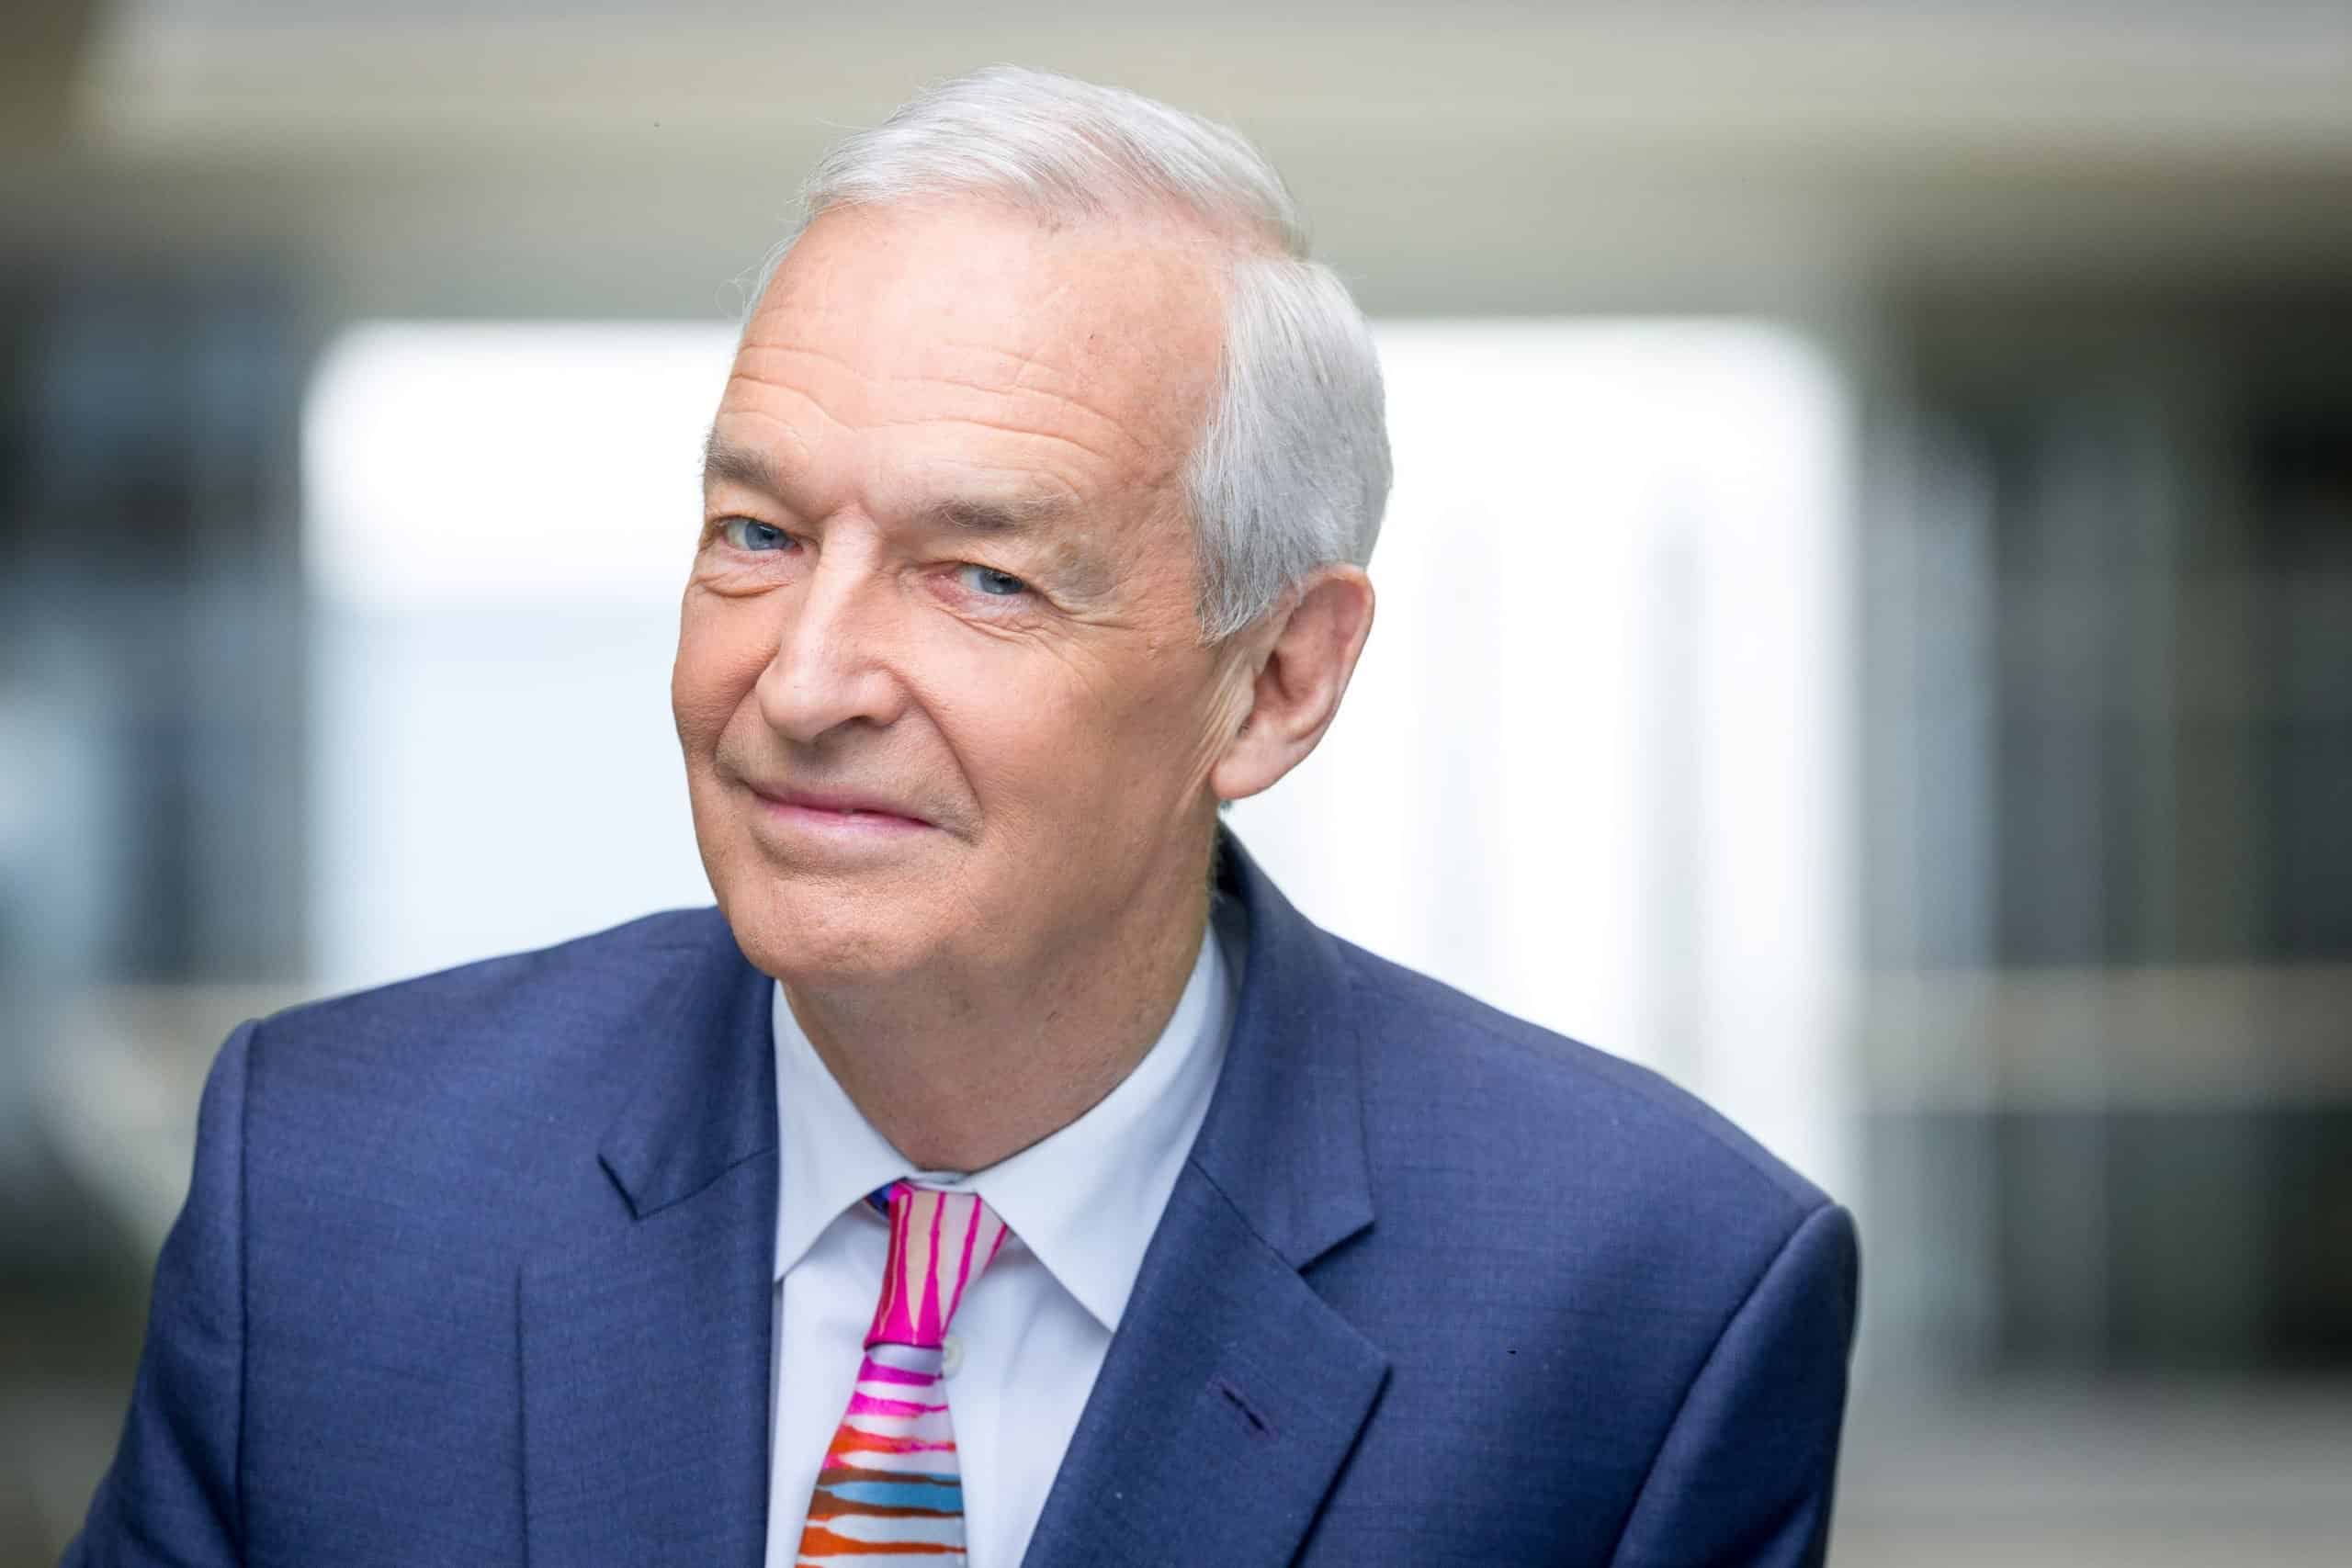 ‘Off the leash:’ Channel 4’s Jon Snow to let rip in new anti-Brexit book